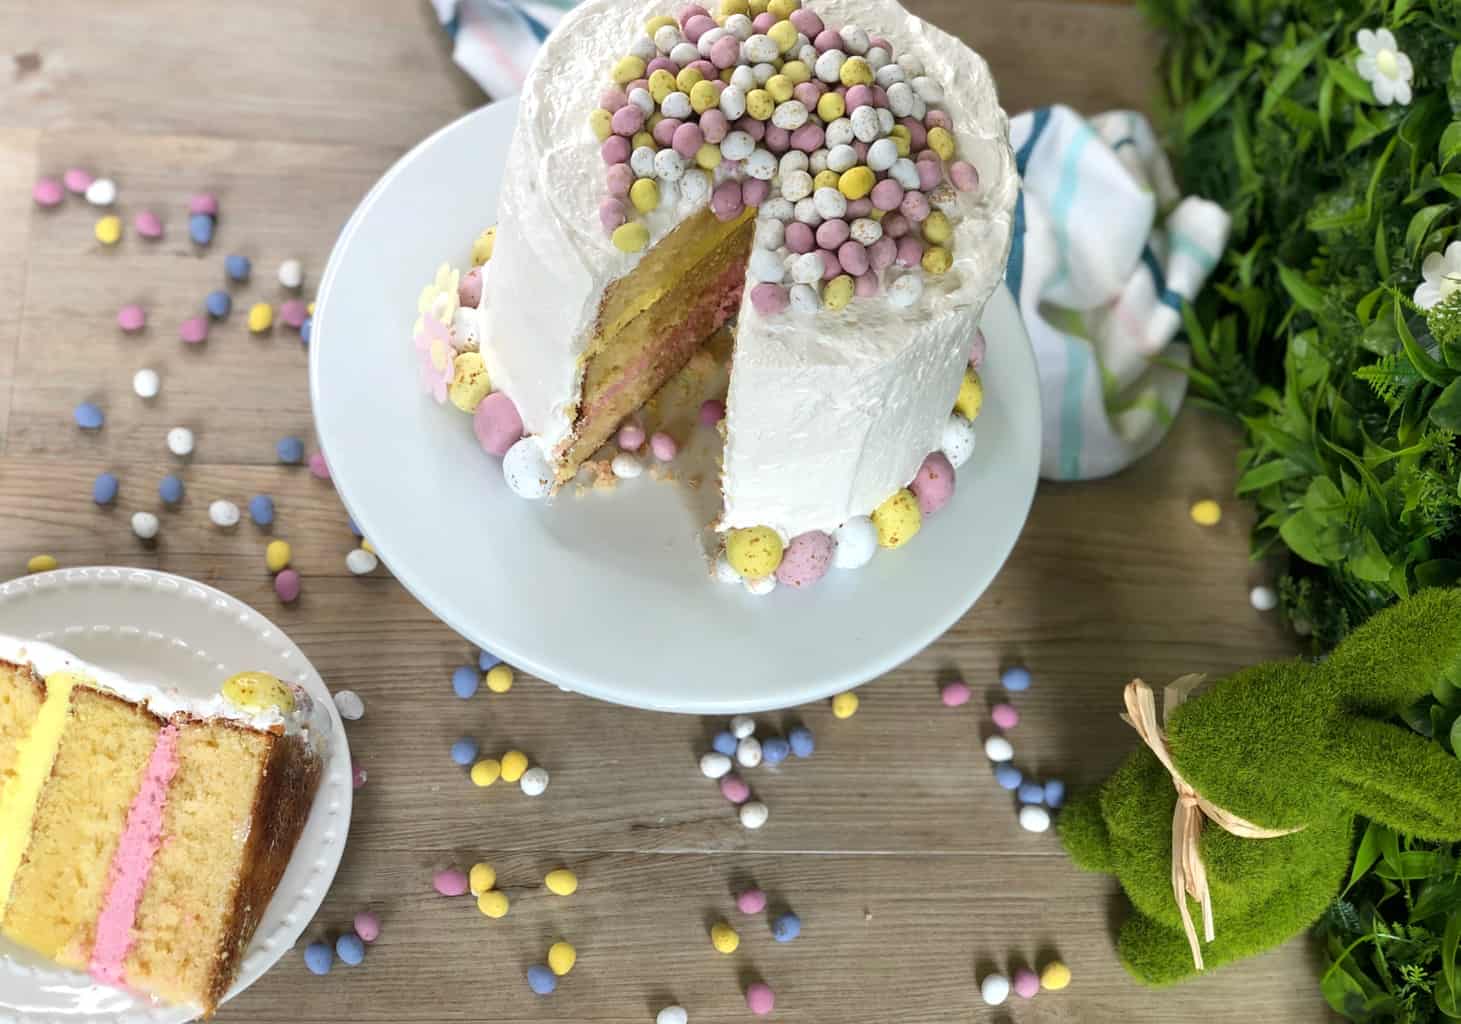 A delicious celebration cake for Easter